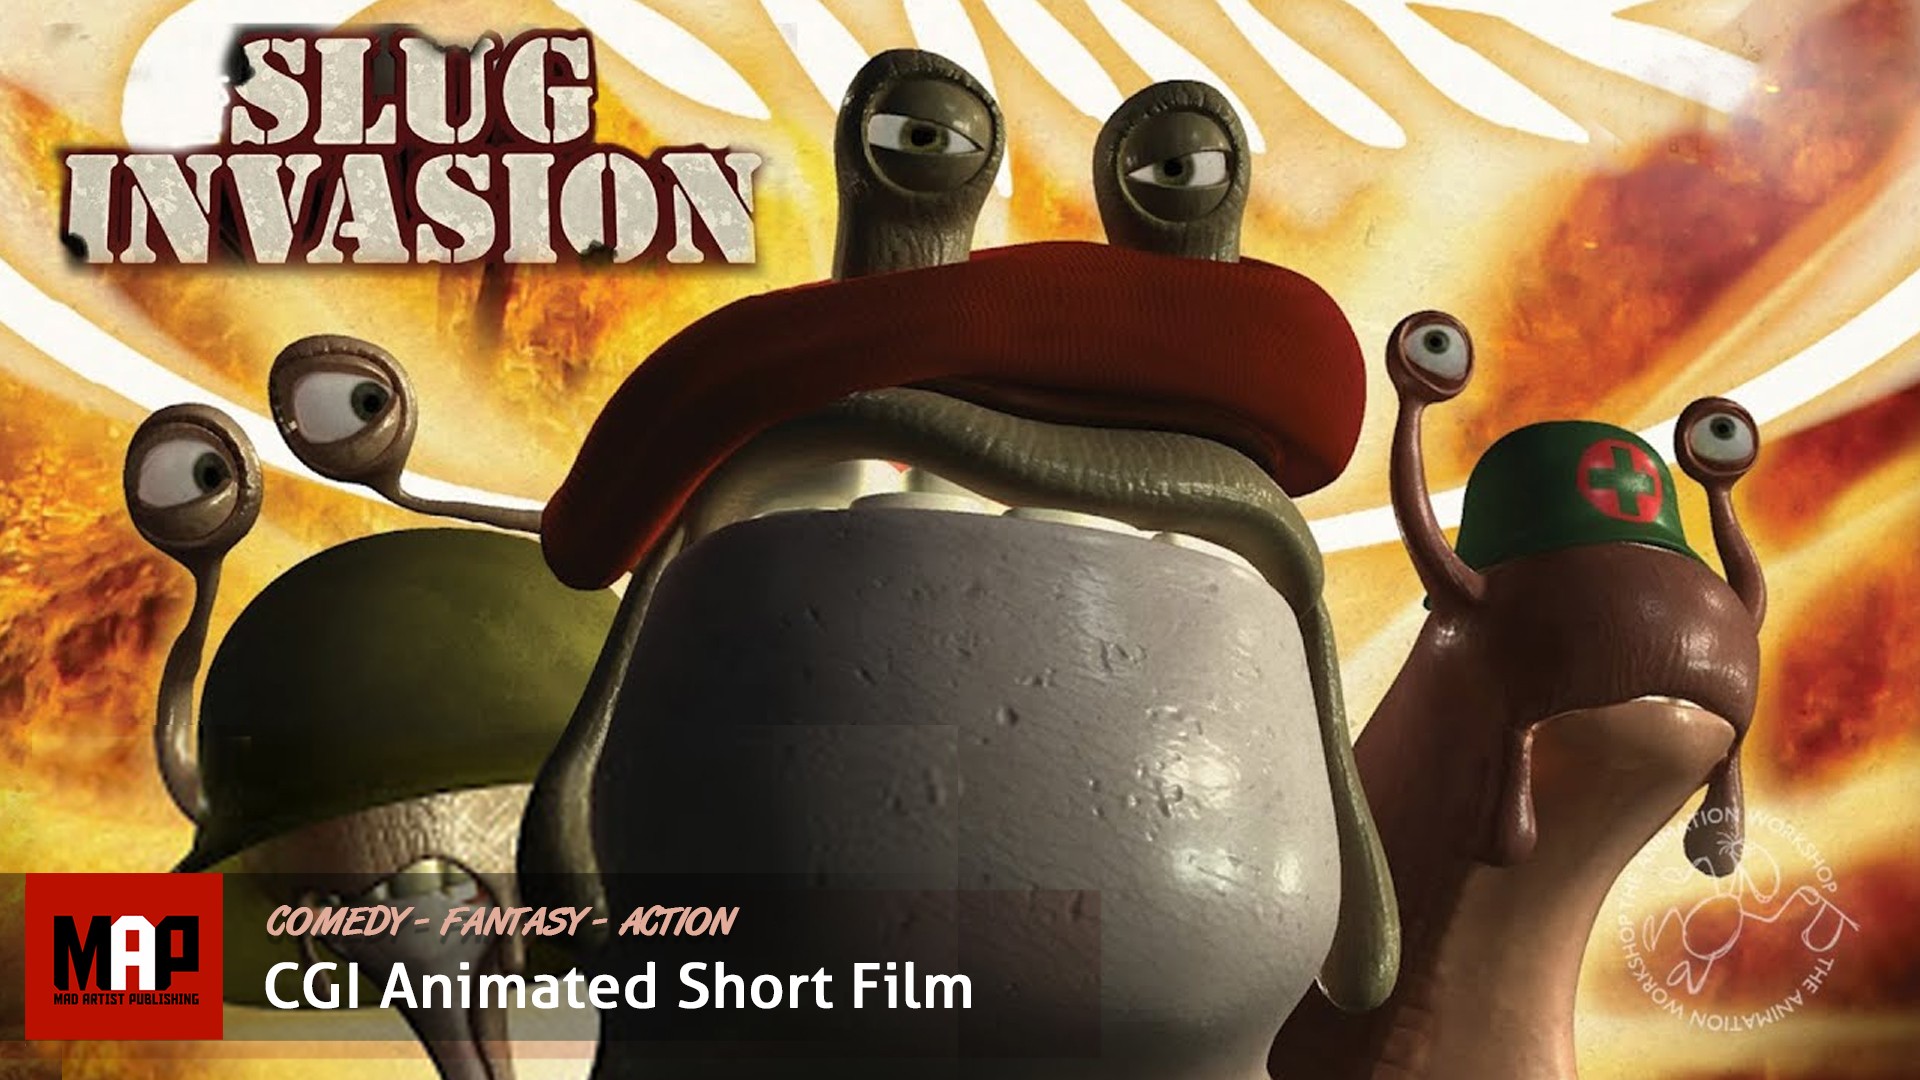 Check out Funny Short Films, Recommended Comedies and CGI Animated Short  Films | Mad Artist Publishing Ltd.